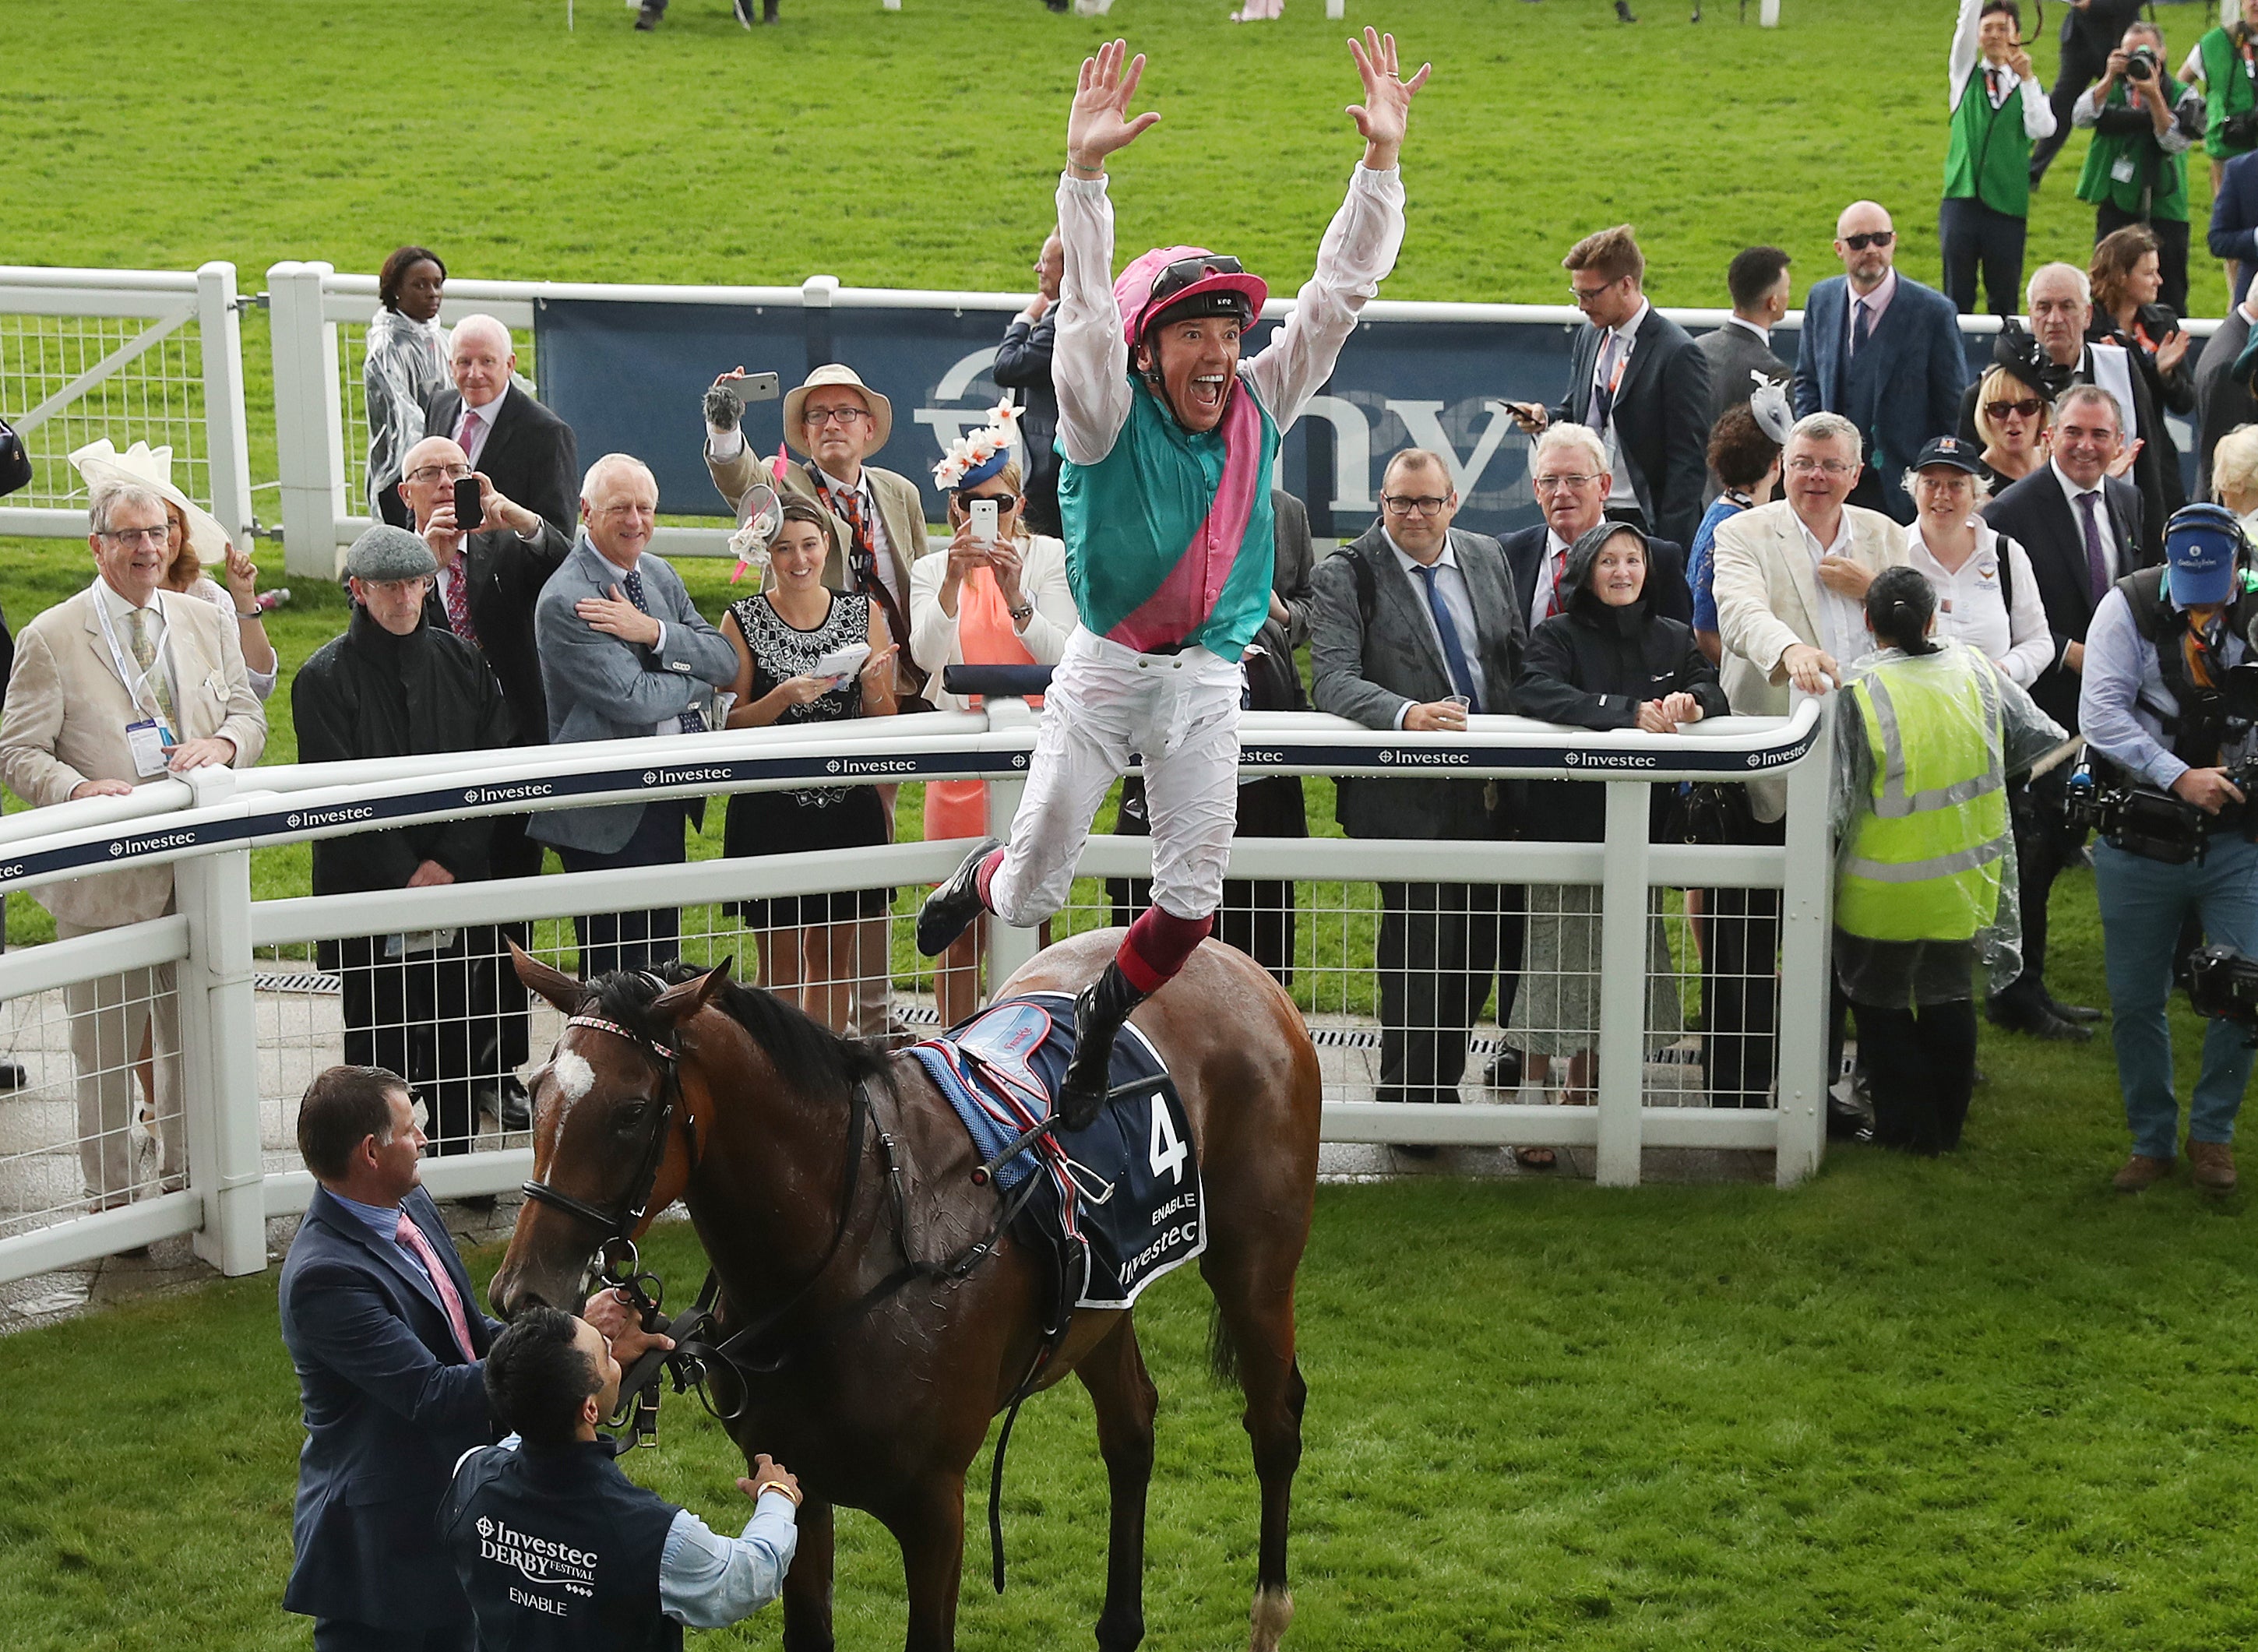 Victory in the 2017 Oaks was just the start of the Enable-Dettori story